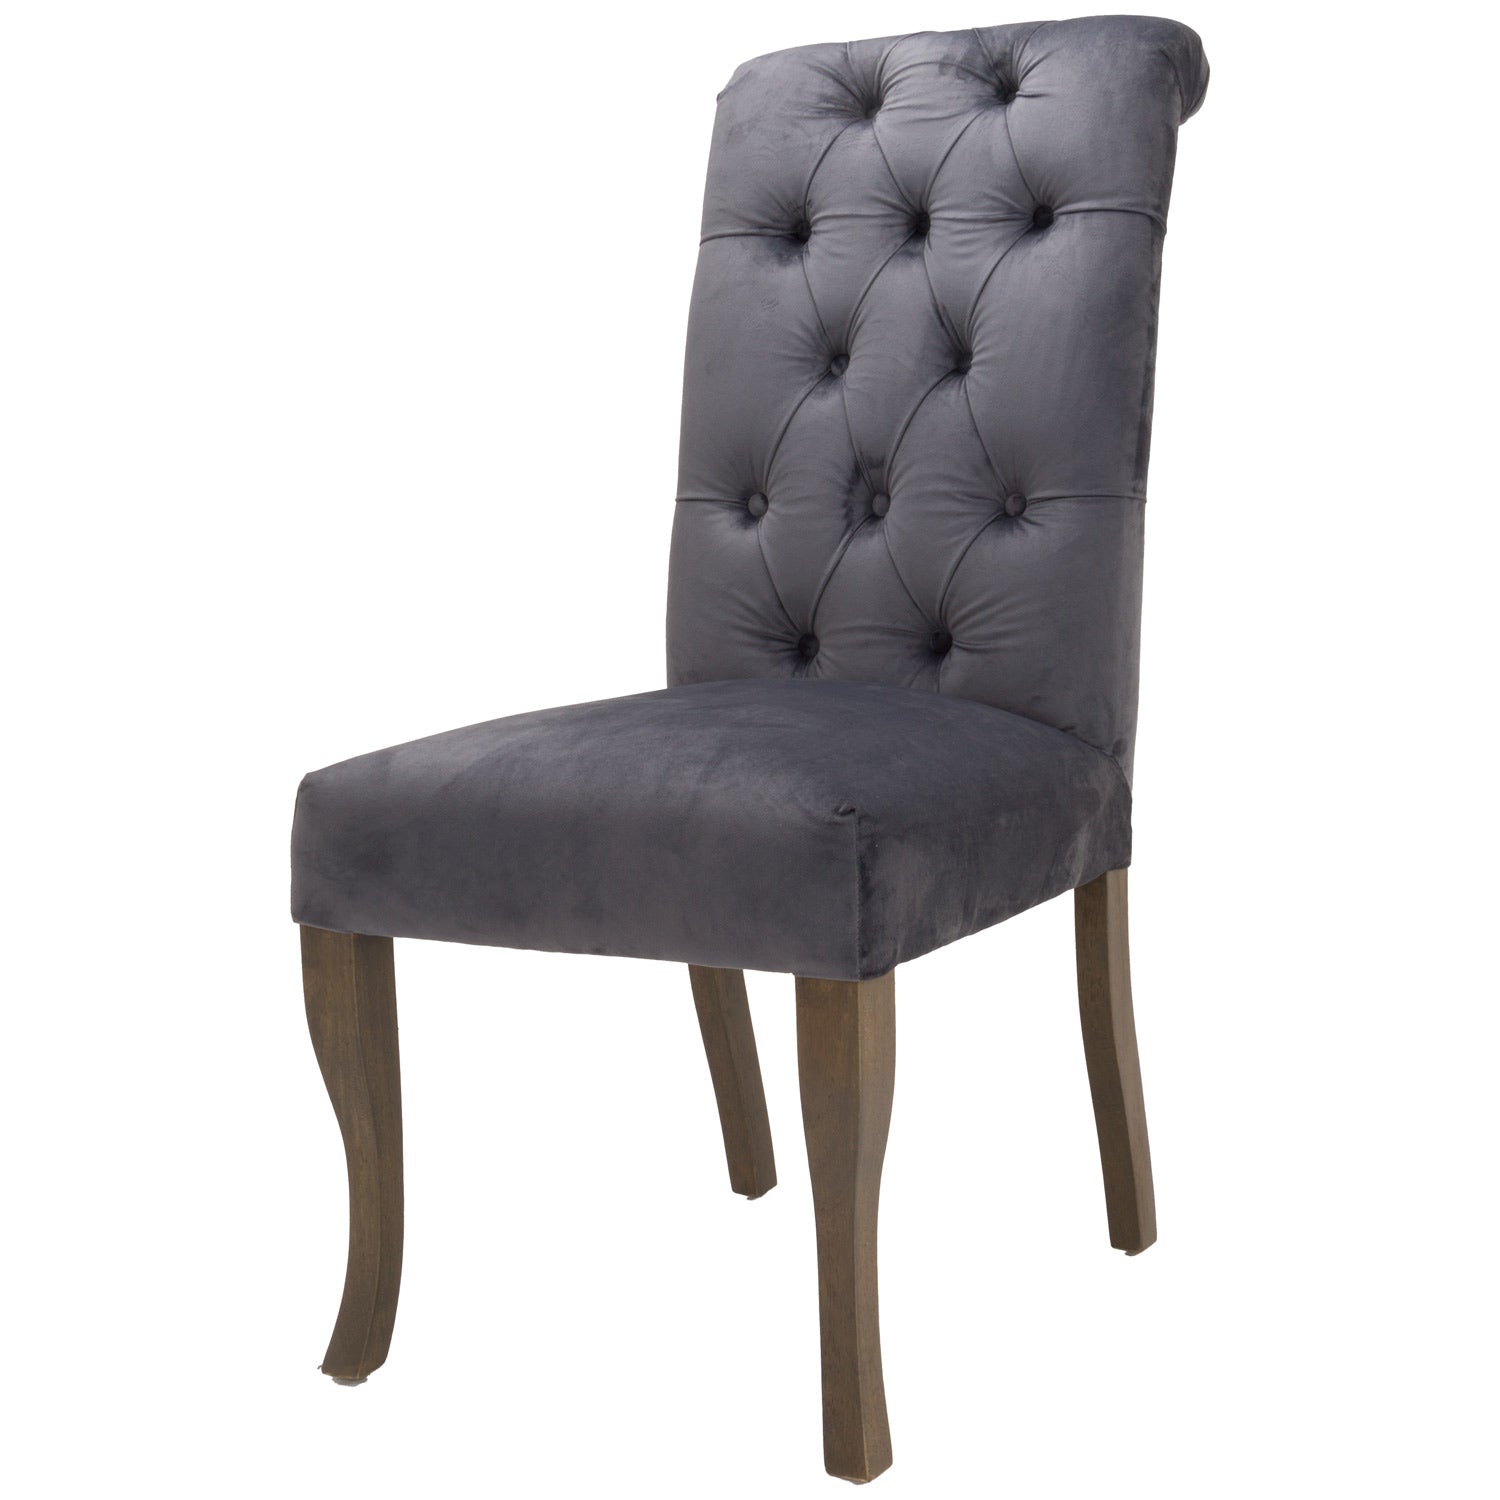 View Knightsbridge Roll Top Dining Chair information